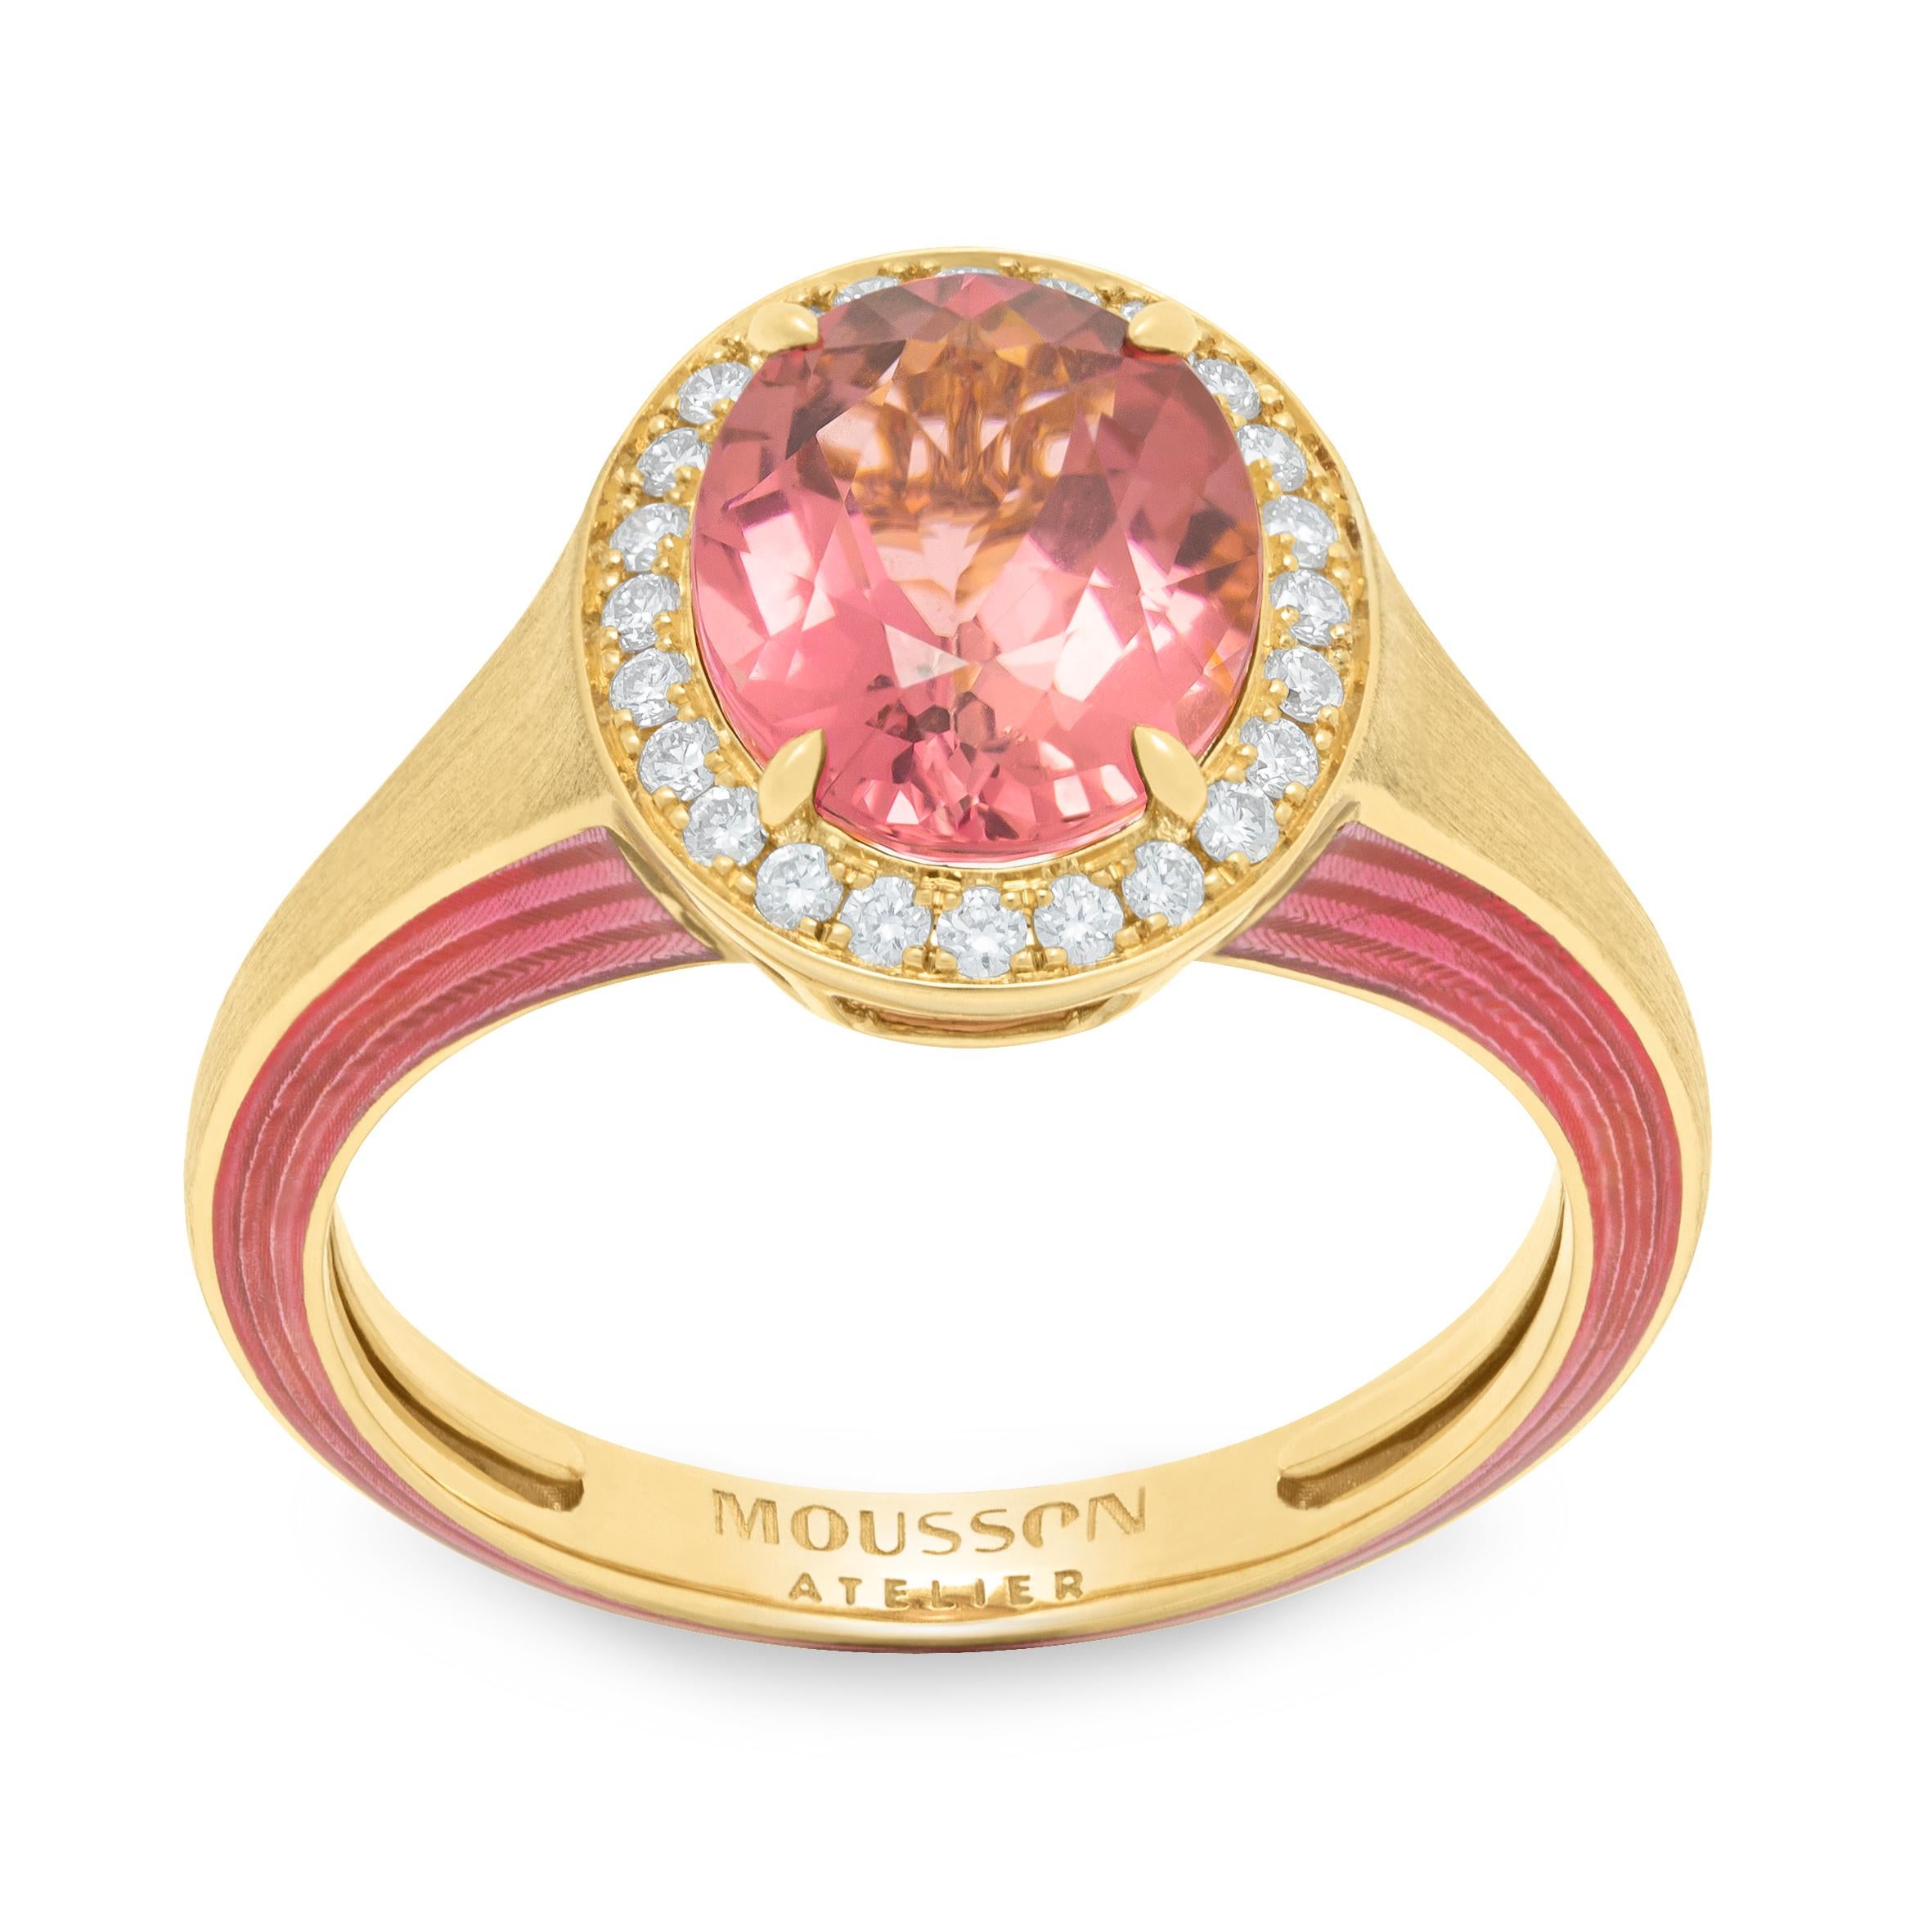 Pink Tourmaline Diamonds 18 Karat Yellow Gold Enamel New Classic Suite
We have published a series of new Rings and Earrings with the same idea but with different details. Introducing a Suite crafted from 18 Karat Yellow Gold, which in company with